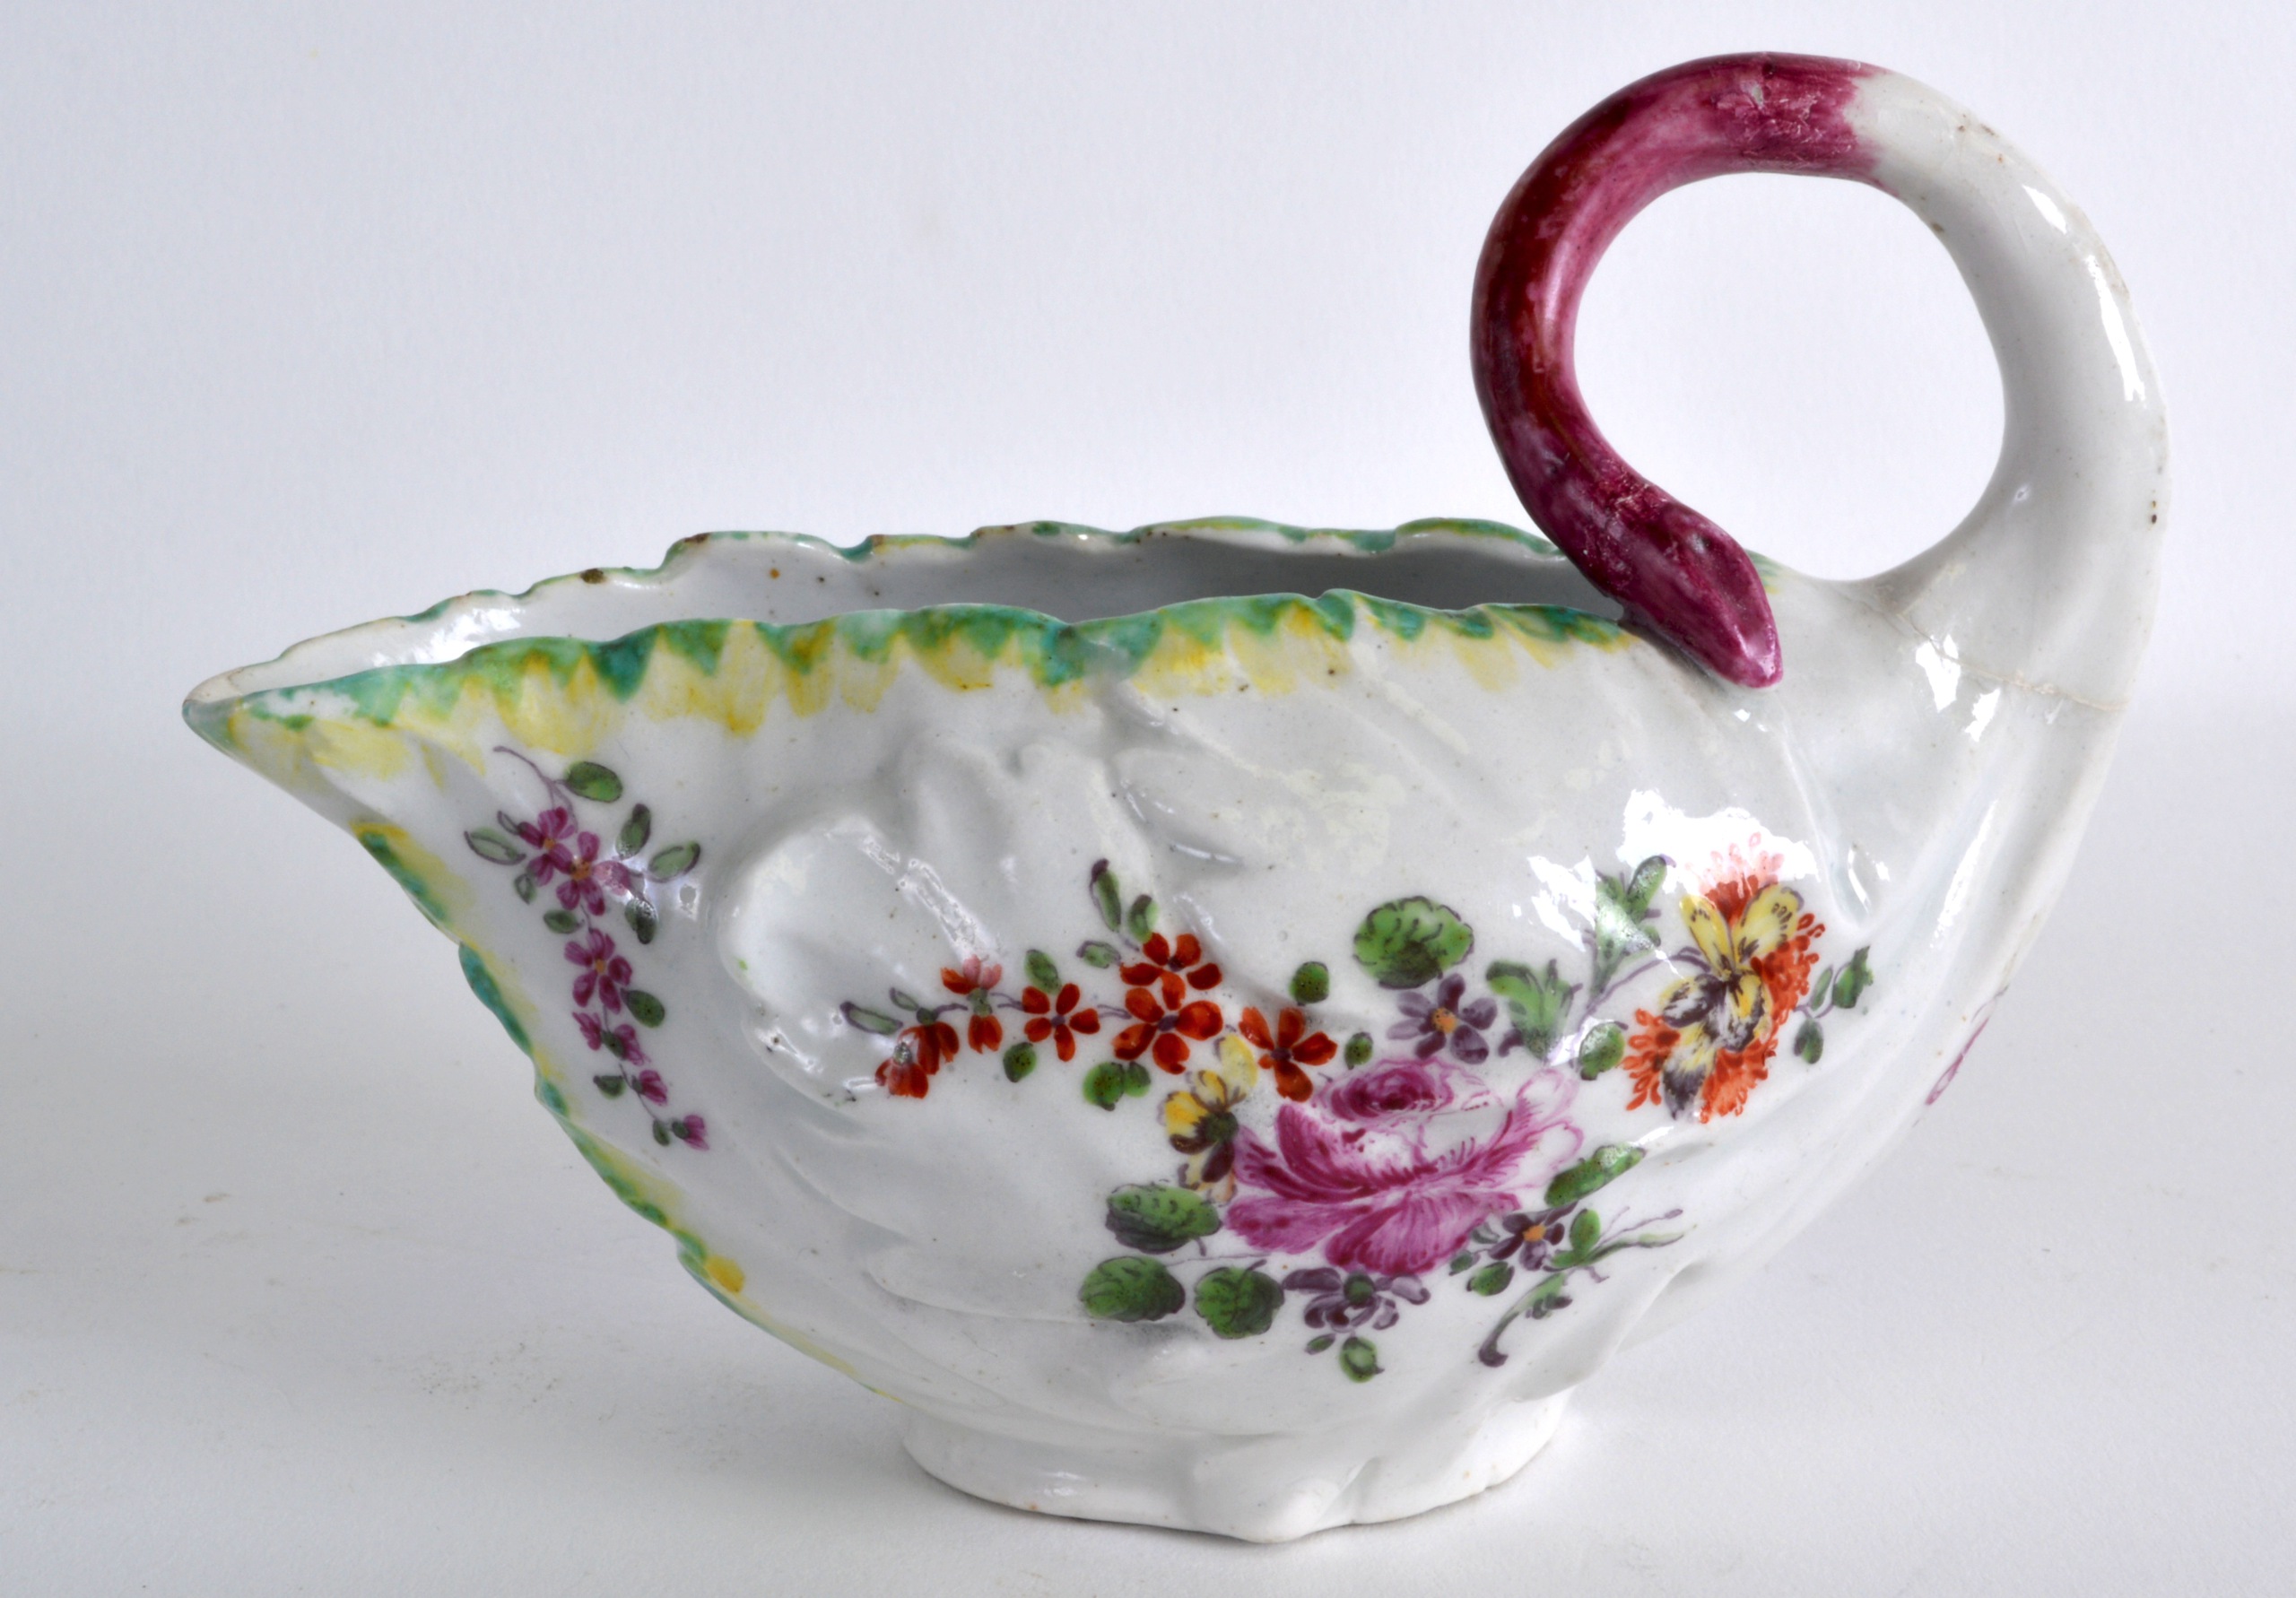 AN 18TH CENTURY DERBY COS LETTUCE LEAF SAUCEBOAT moulded and painted with flowers. 5.25ins wide.